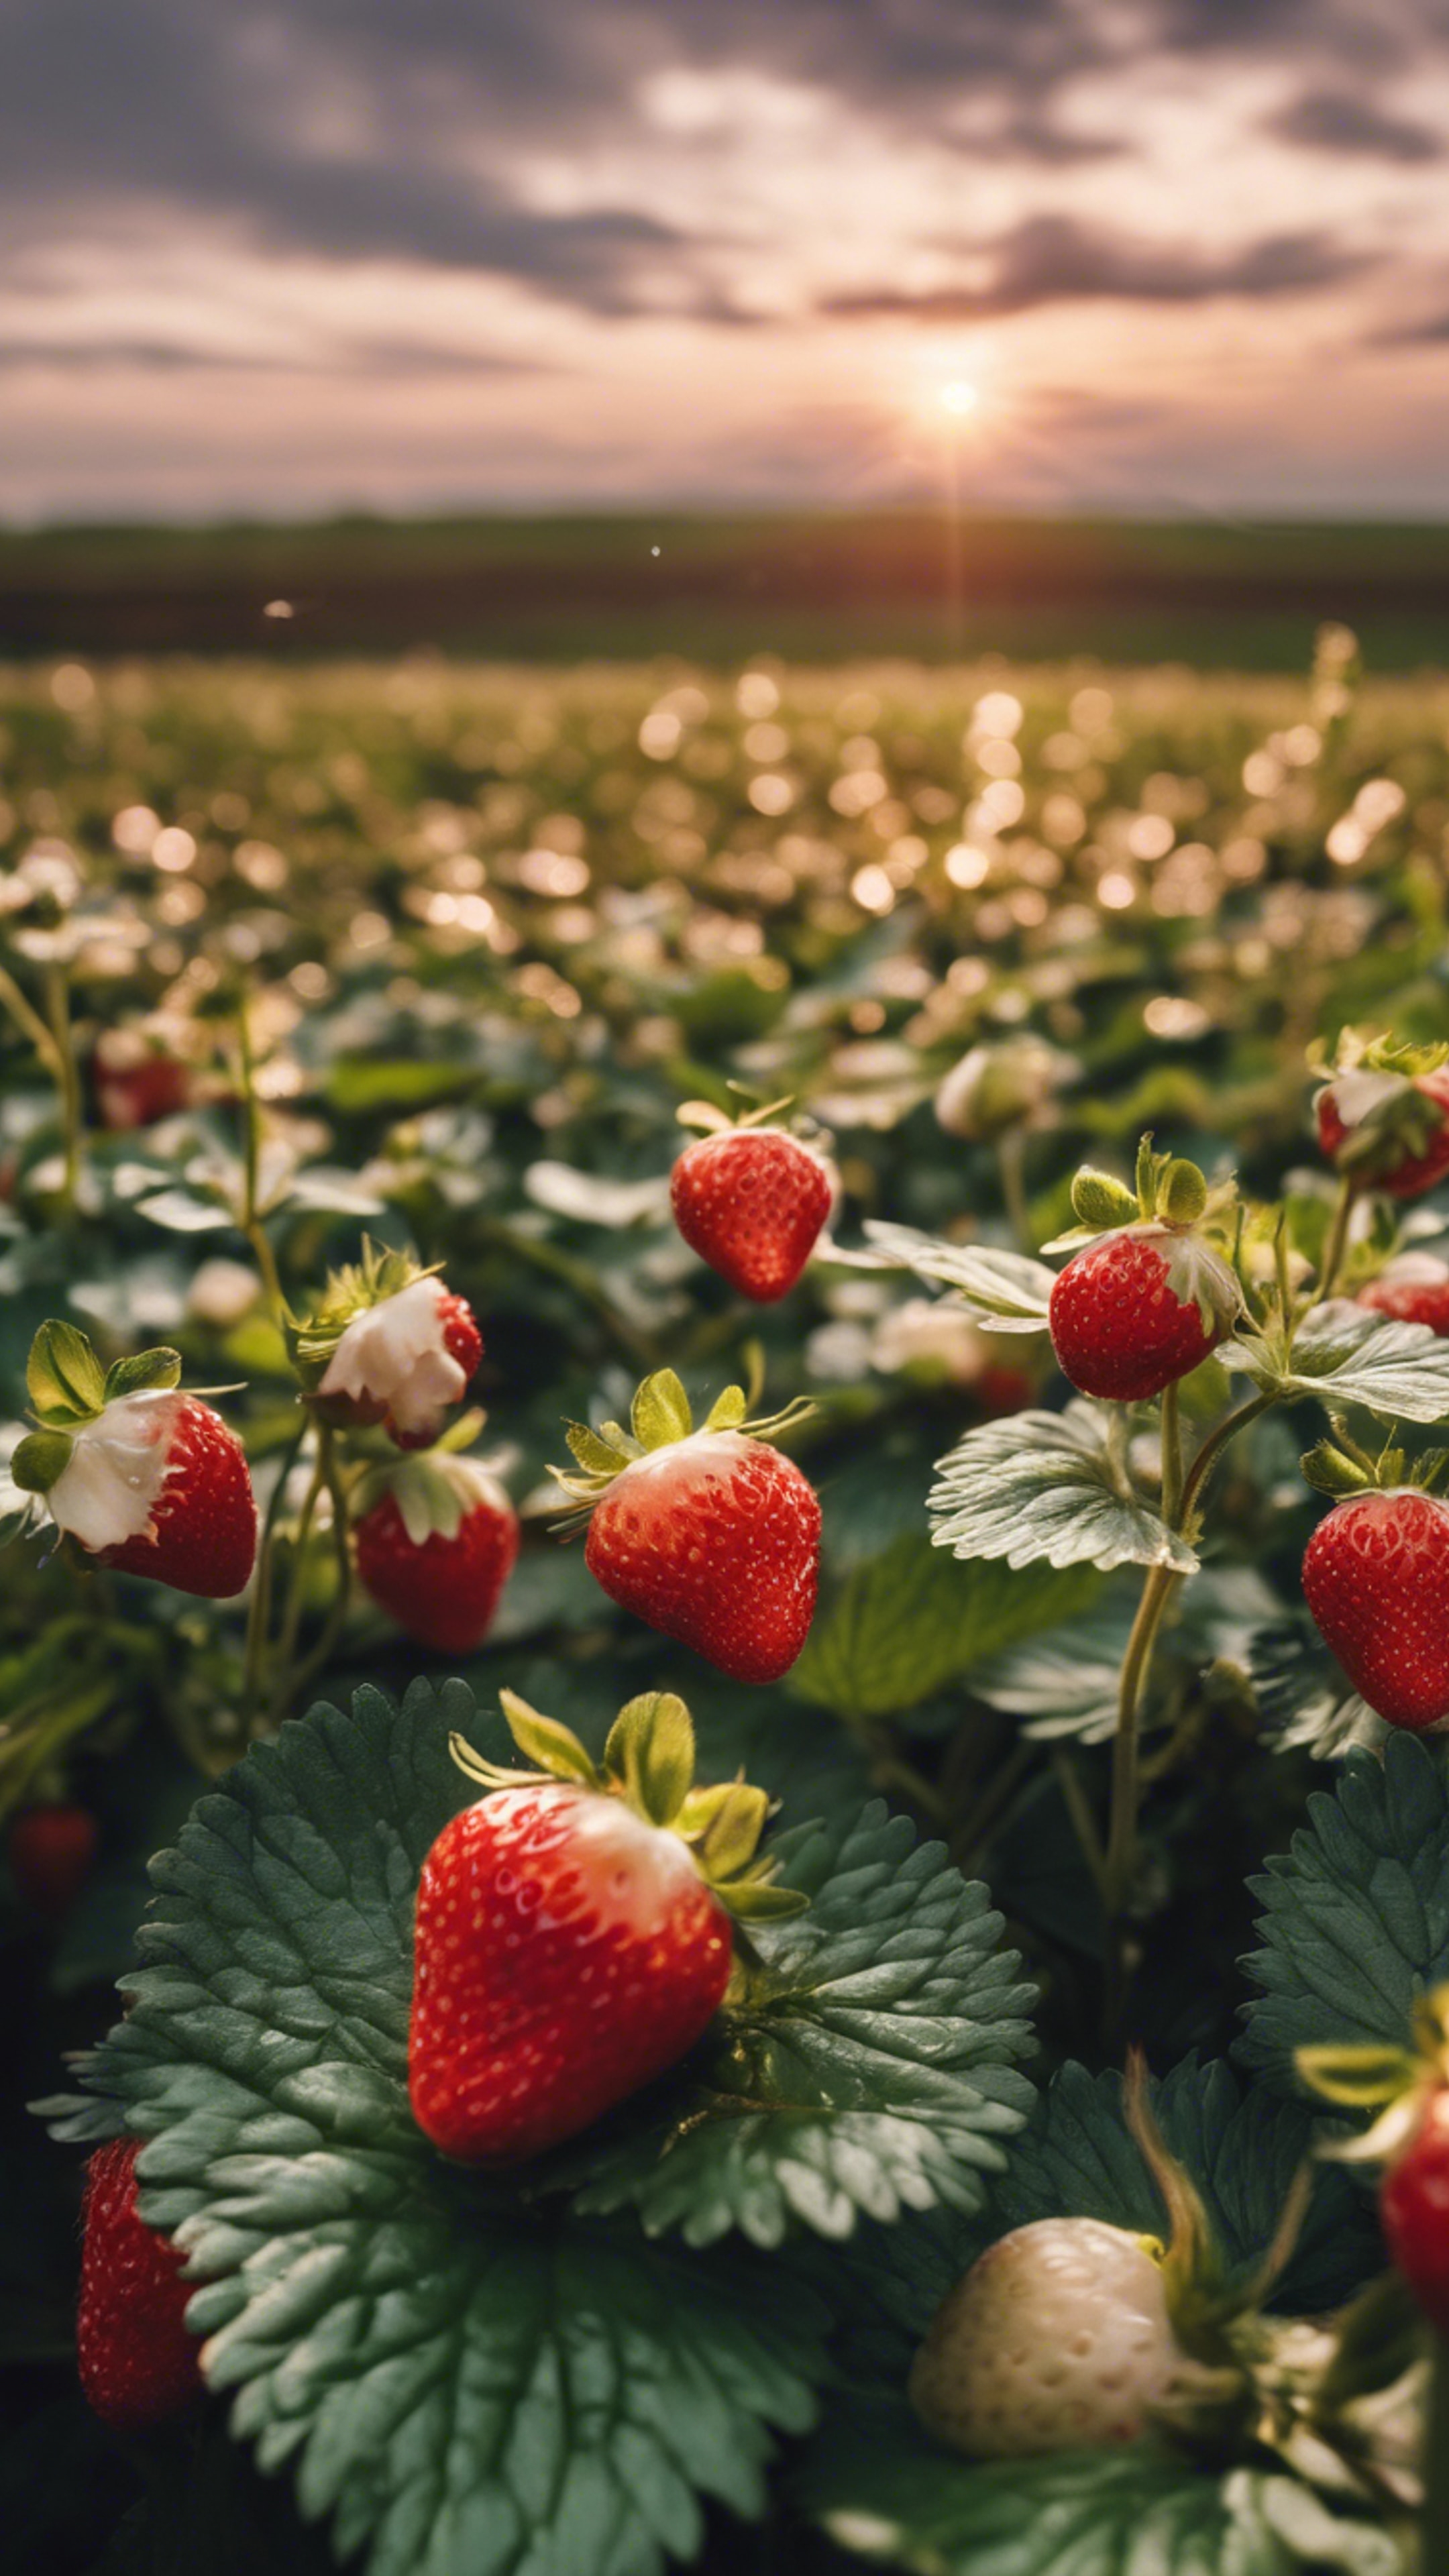 A romantic sunset view over a field of blooming strawberry plants. Tapeta[3adde1a5bf4e4528ba85]